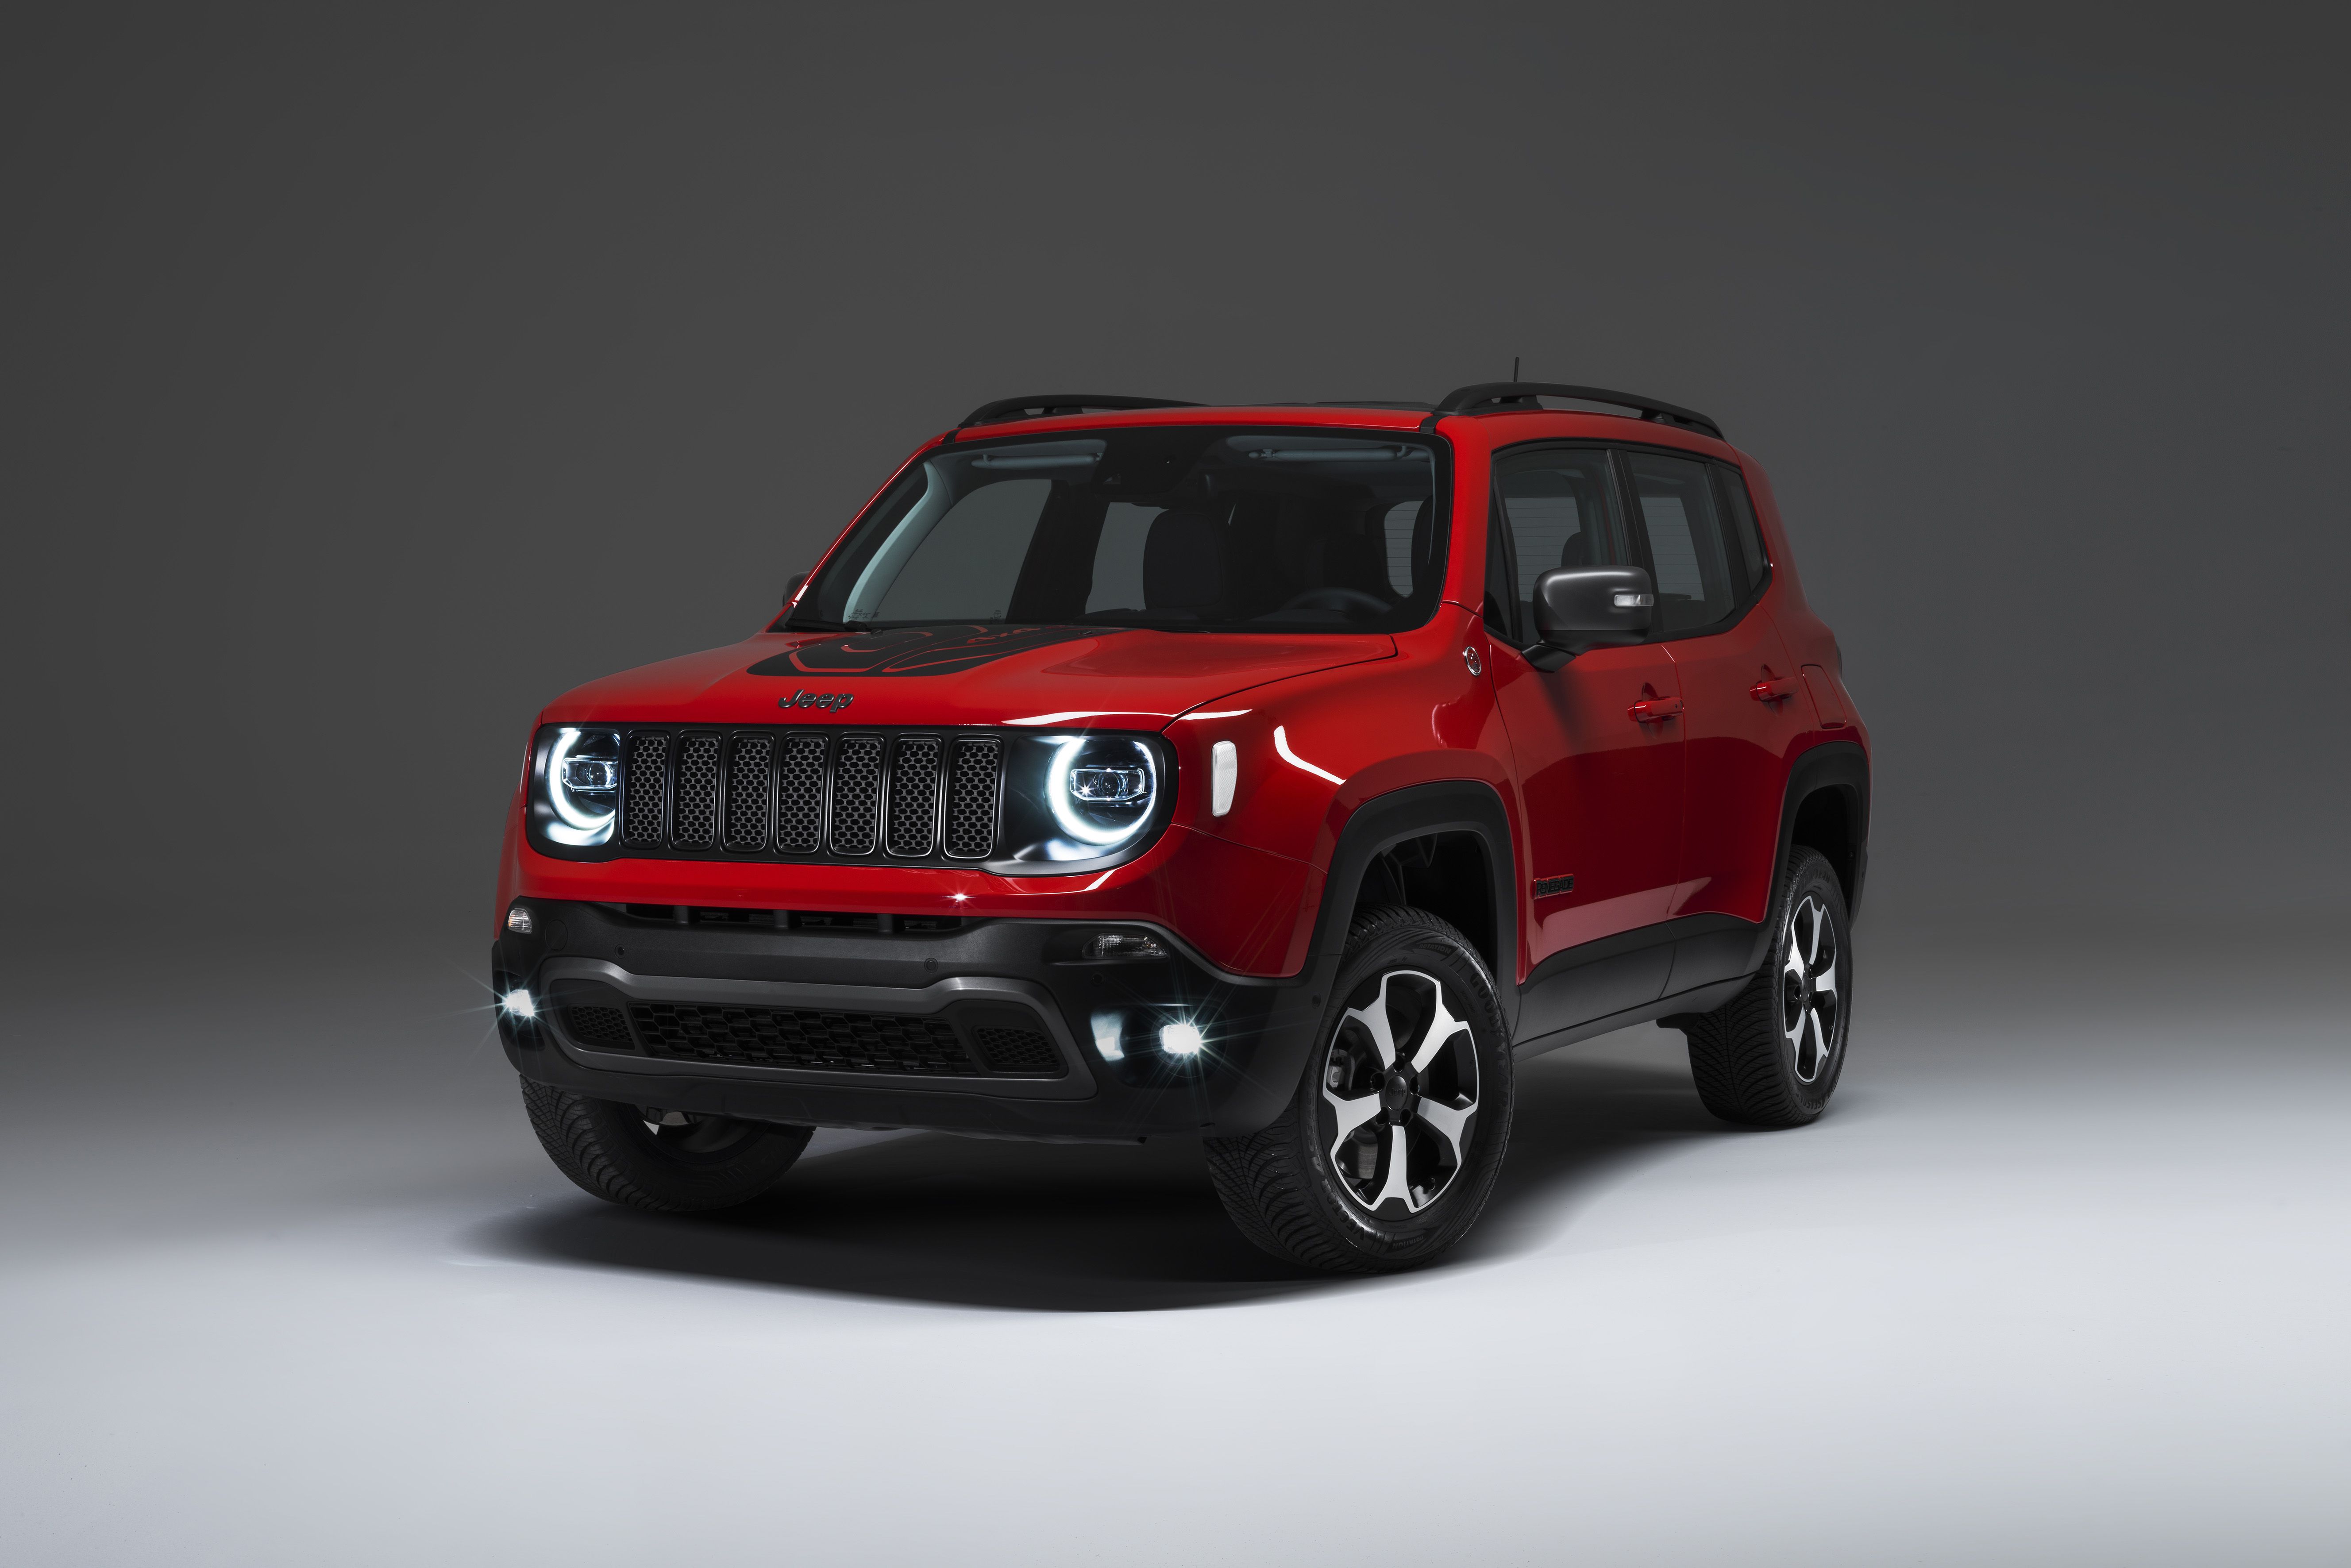 2018 Jeep Enters the Electric Market with Renegade Plug-in Hybrid